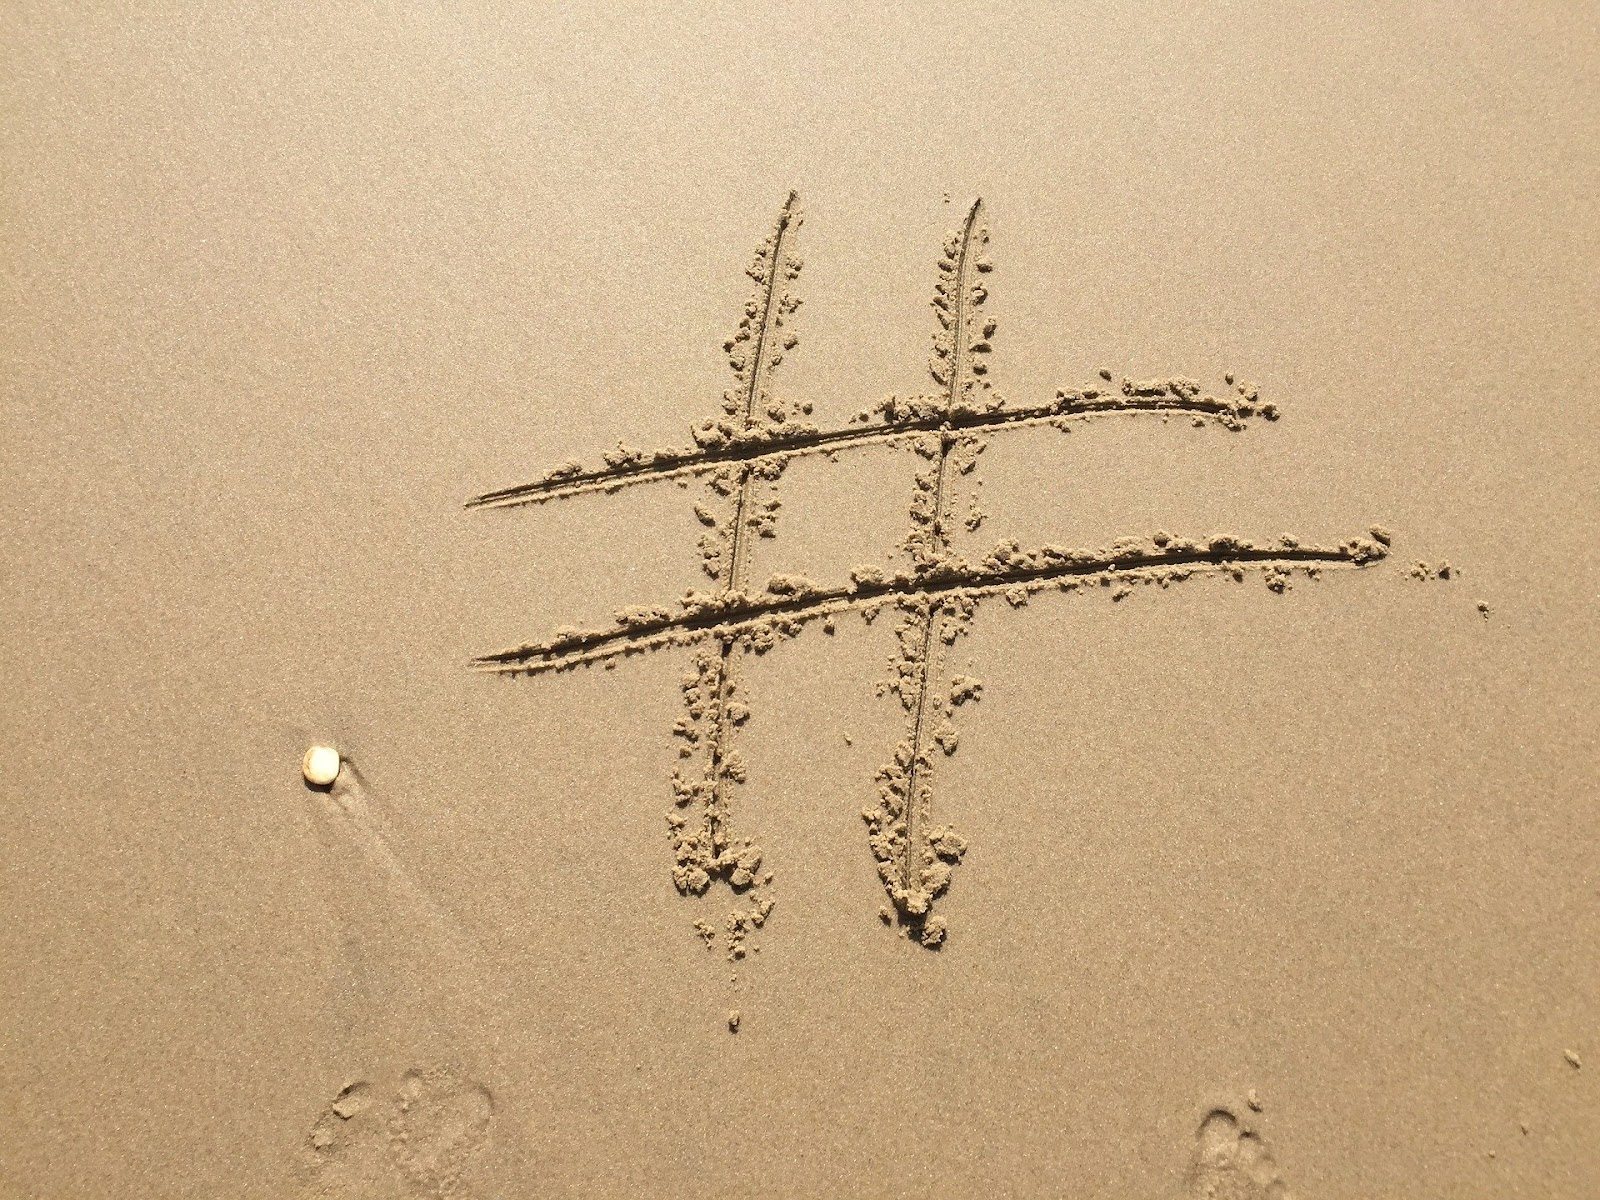 A picture of the hashtag symbol that's been drawn in the sand